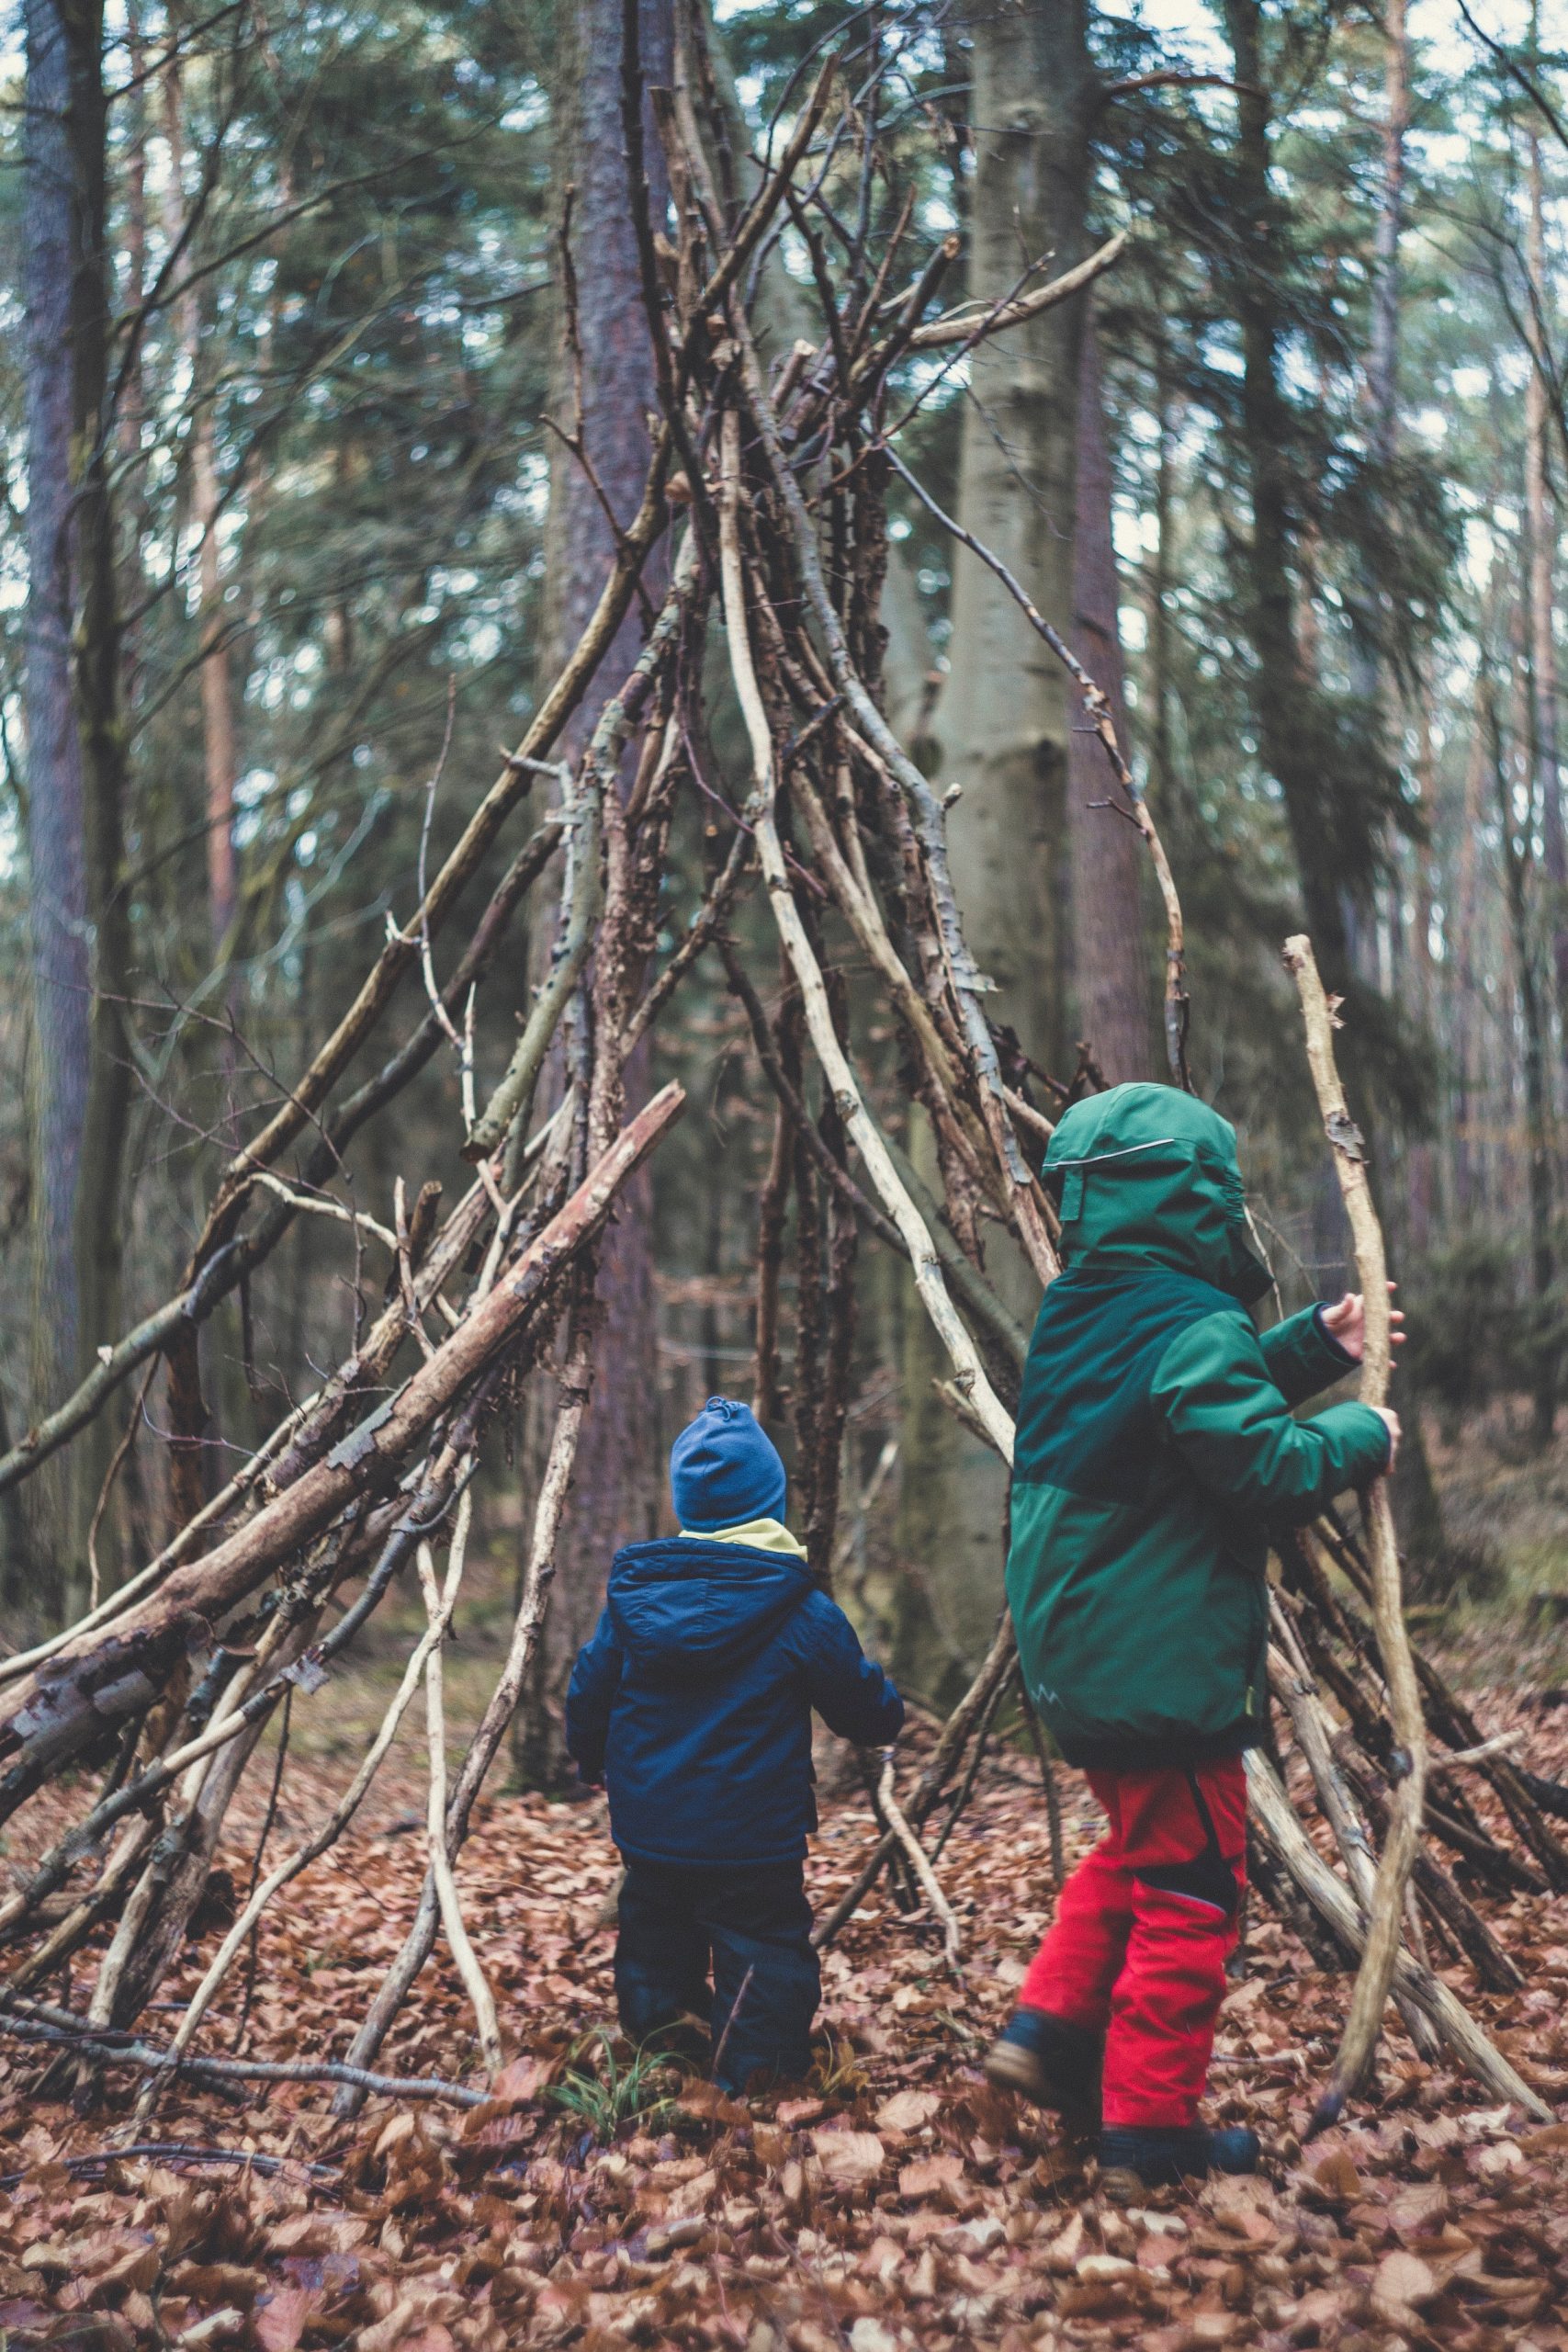 How Does Nature Impact Children’s Well-Being?